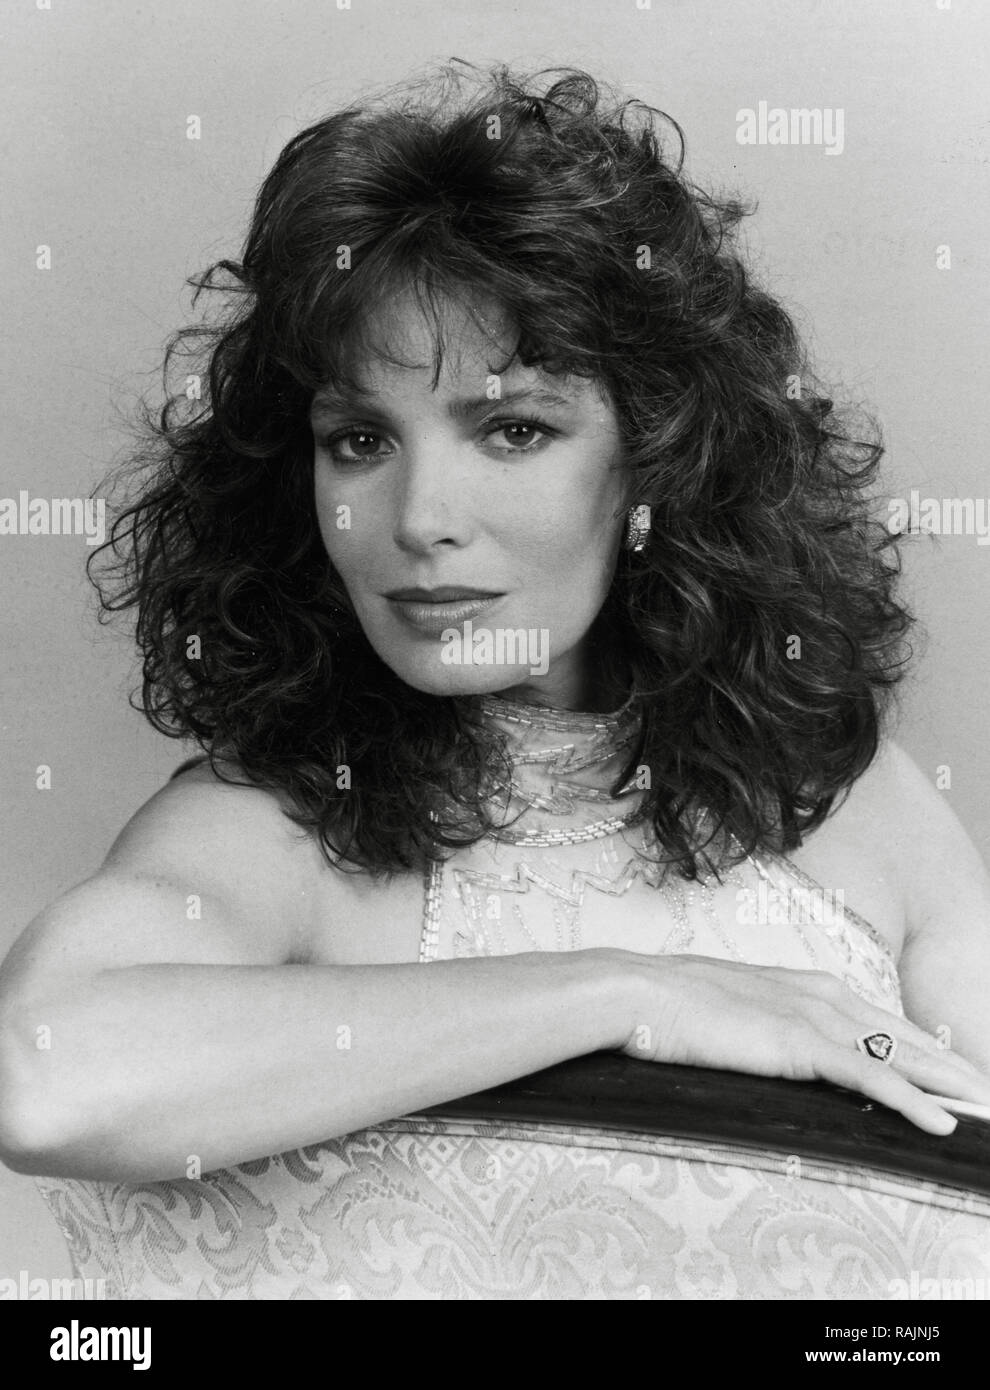 Publicity photo of Jaclyn Smith,  circa 1986   File Reference # 33636 906THA Stock Photo